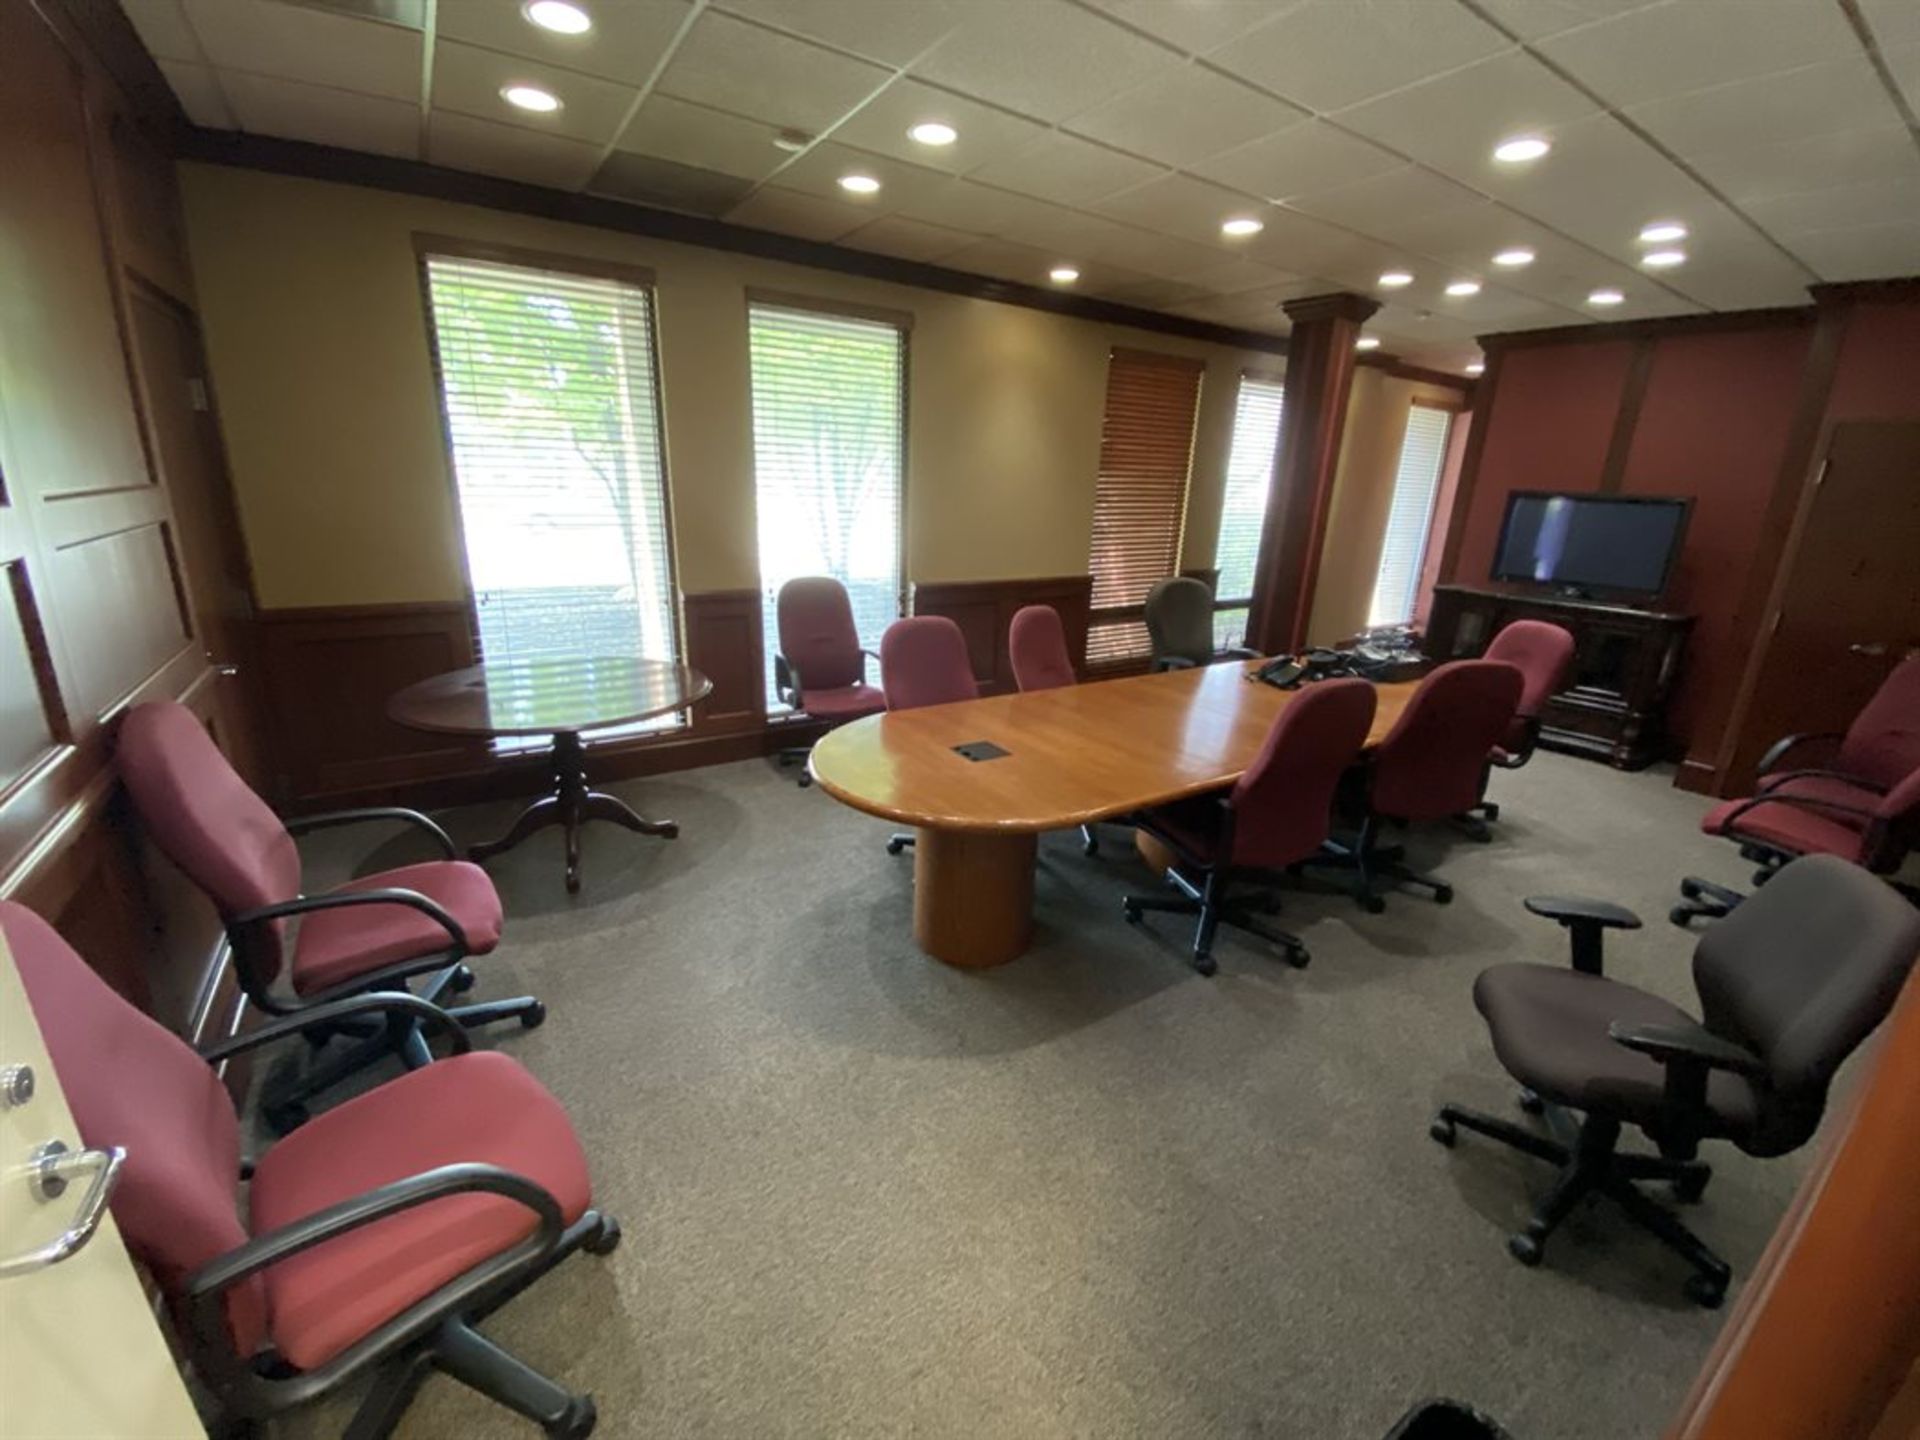 Conference Room Furniture (Furniture Only)